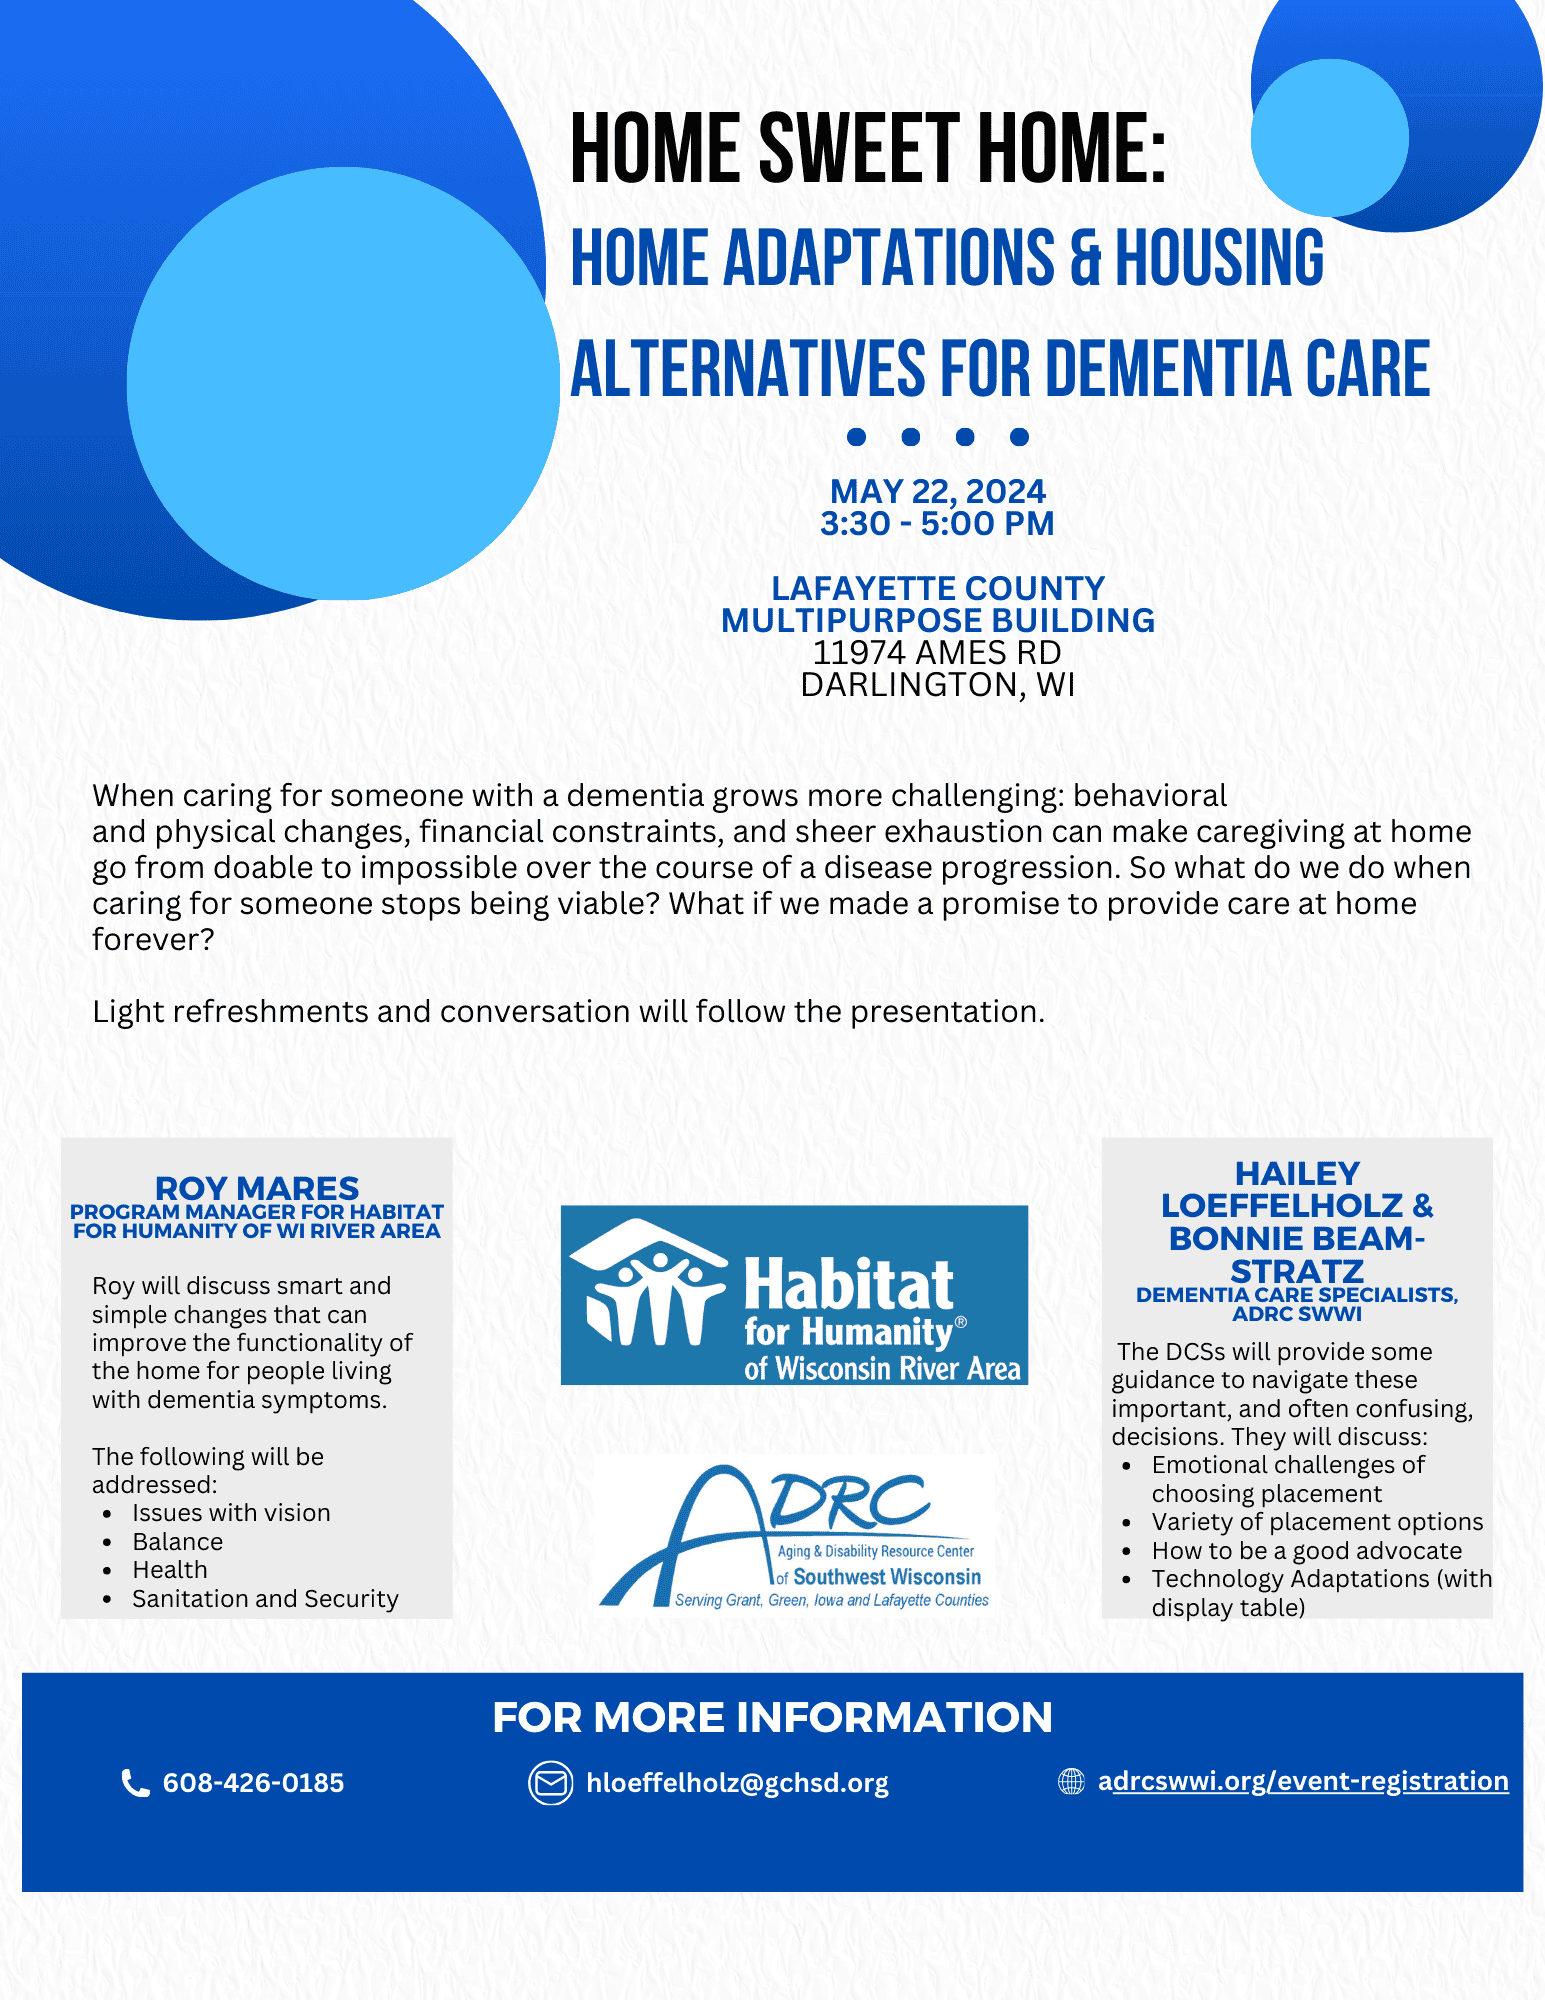 Home Sweet Home: Home Adaptations & Housing Alternatives for Dementia Care @ Lafayette County Multipurpose Building